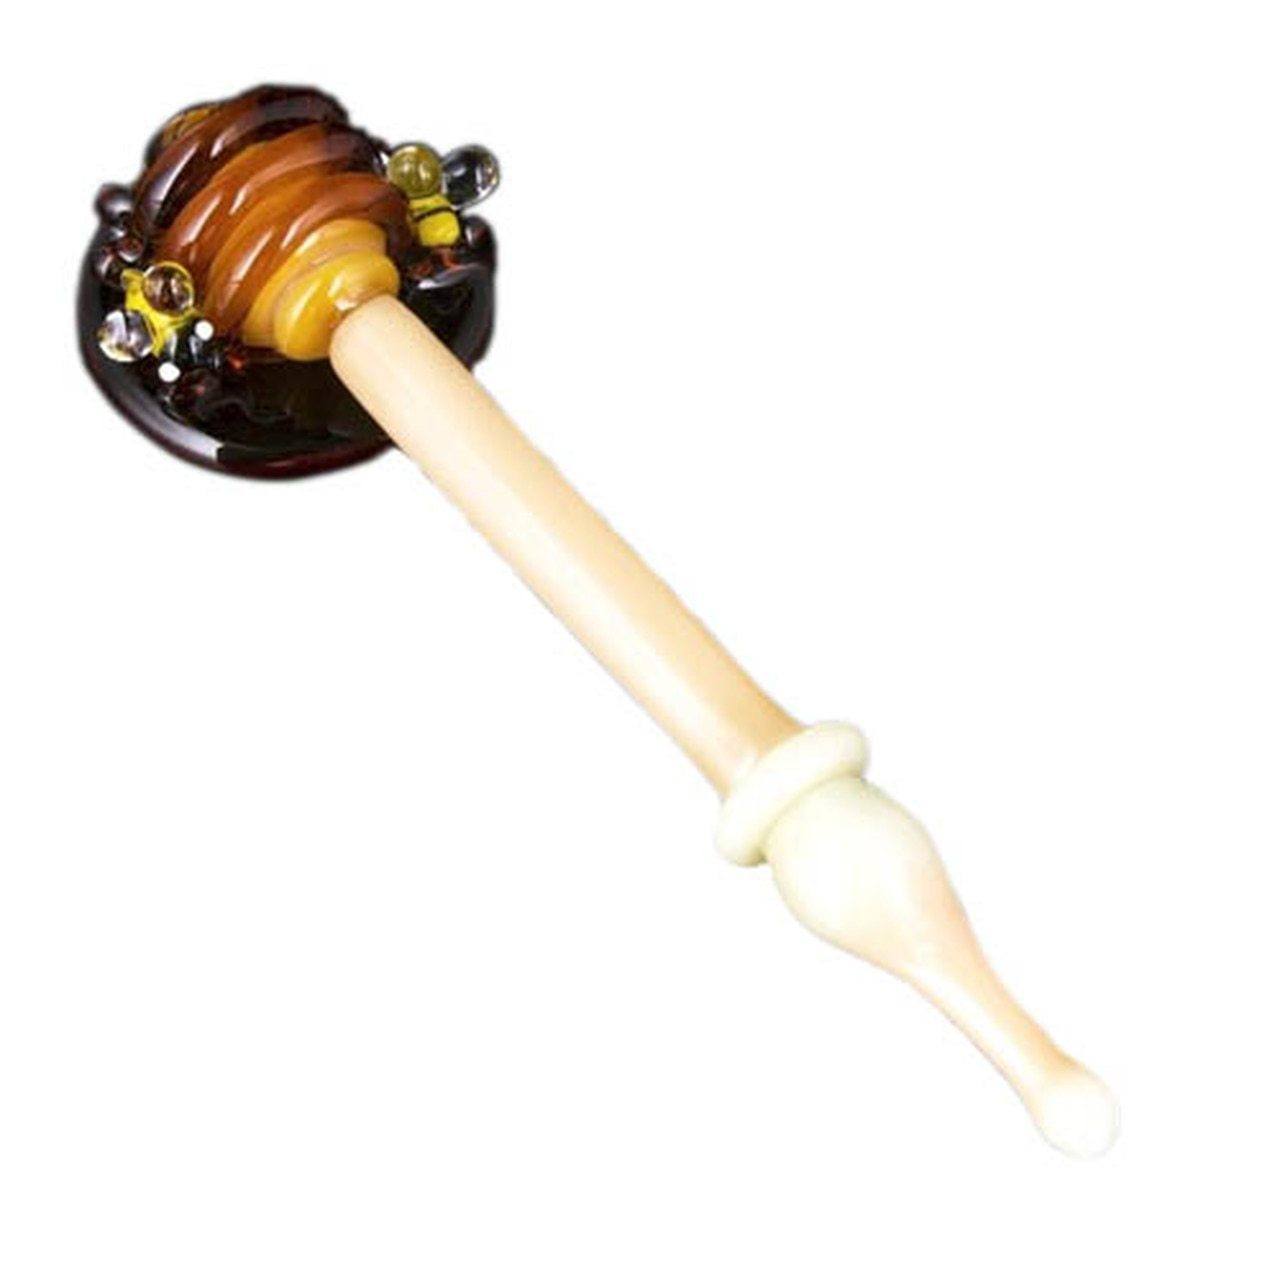 Honey Comb Dabber at Flower Power Packages